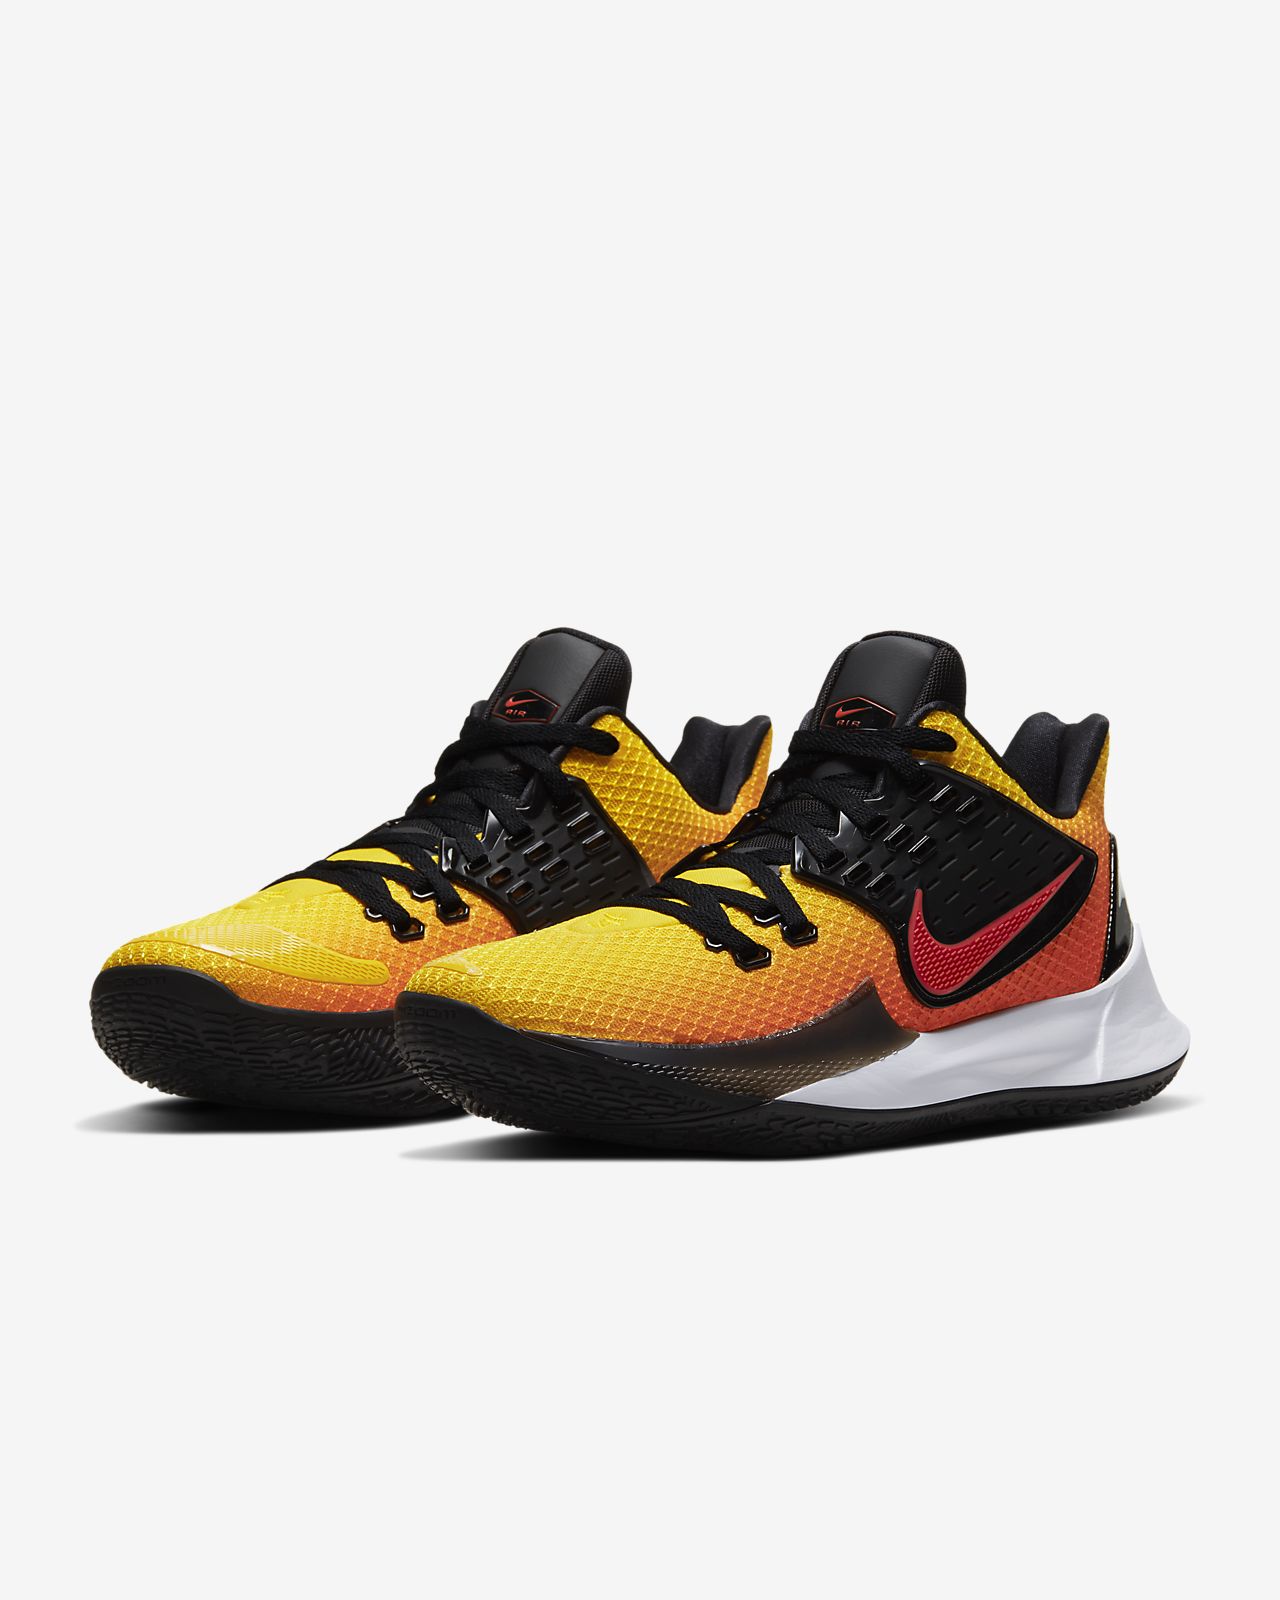 kyrie low 2 weight